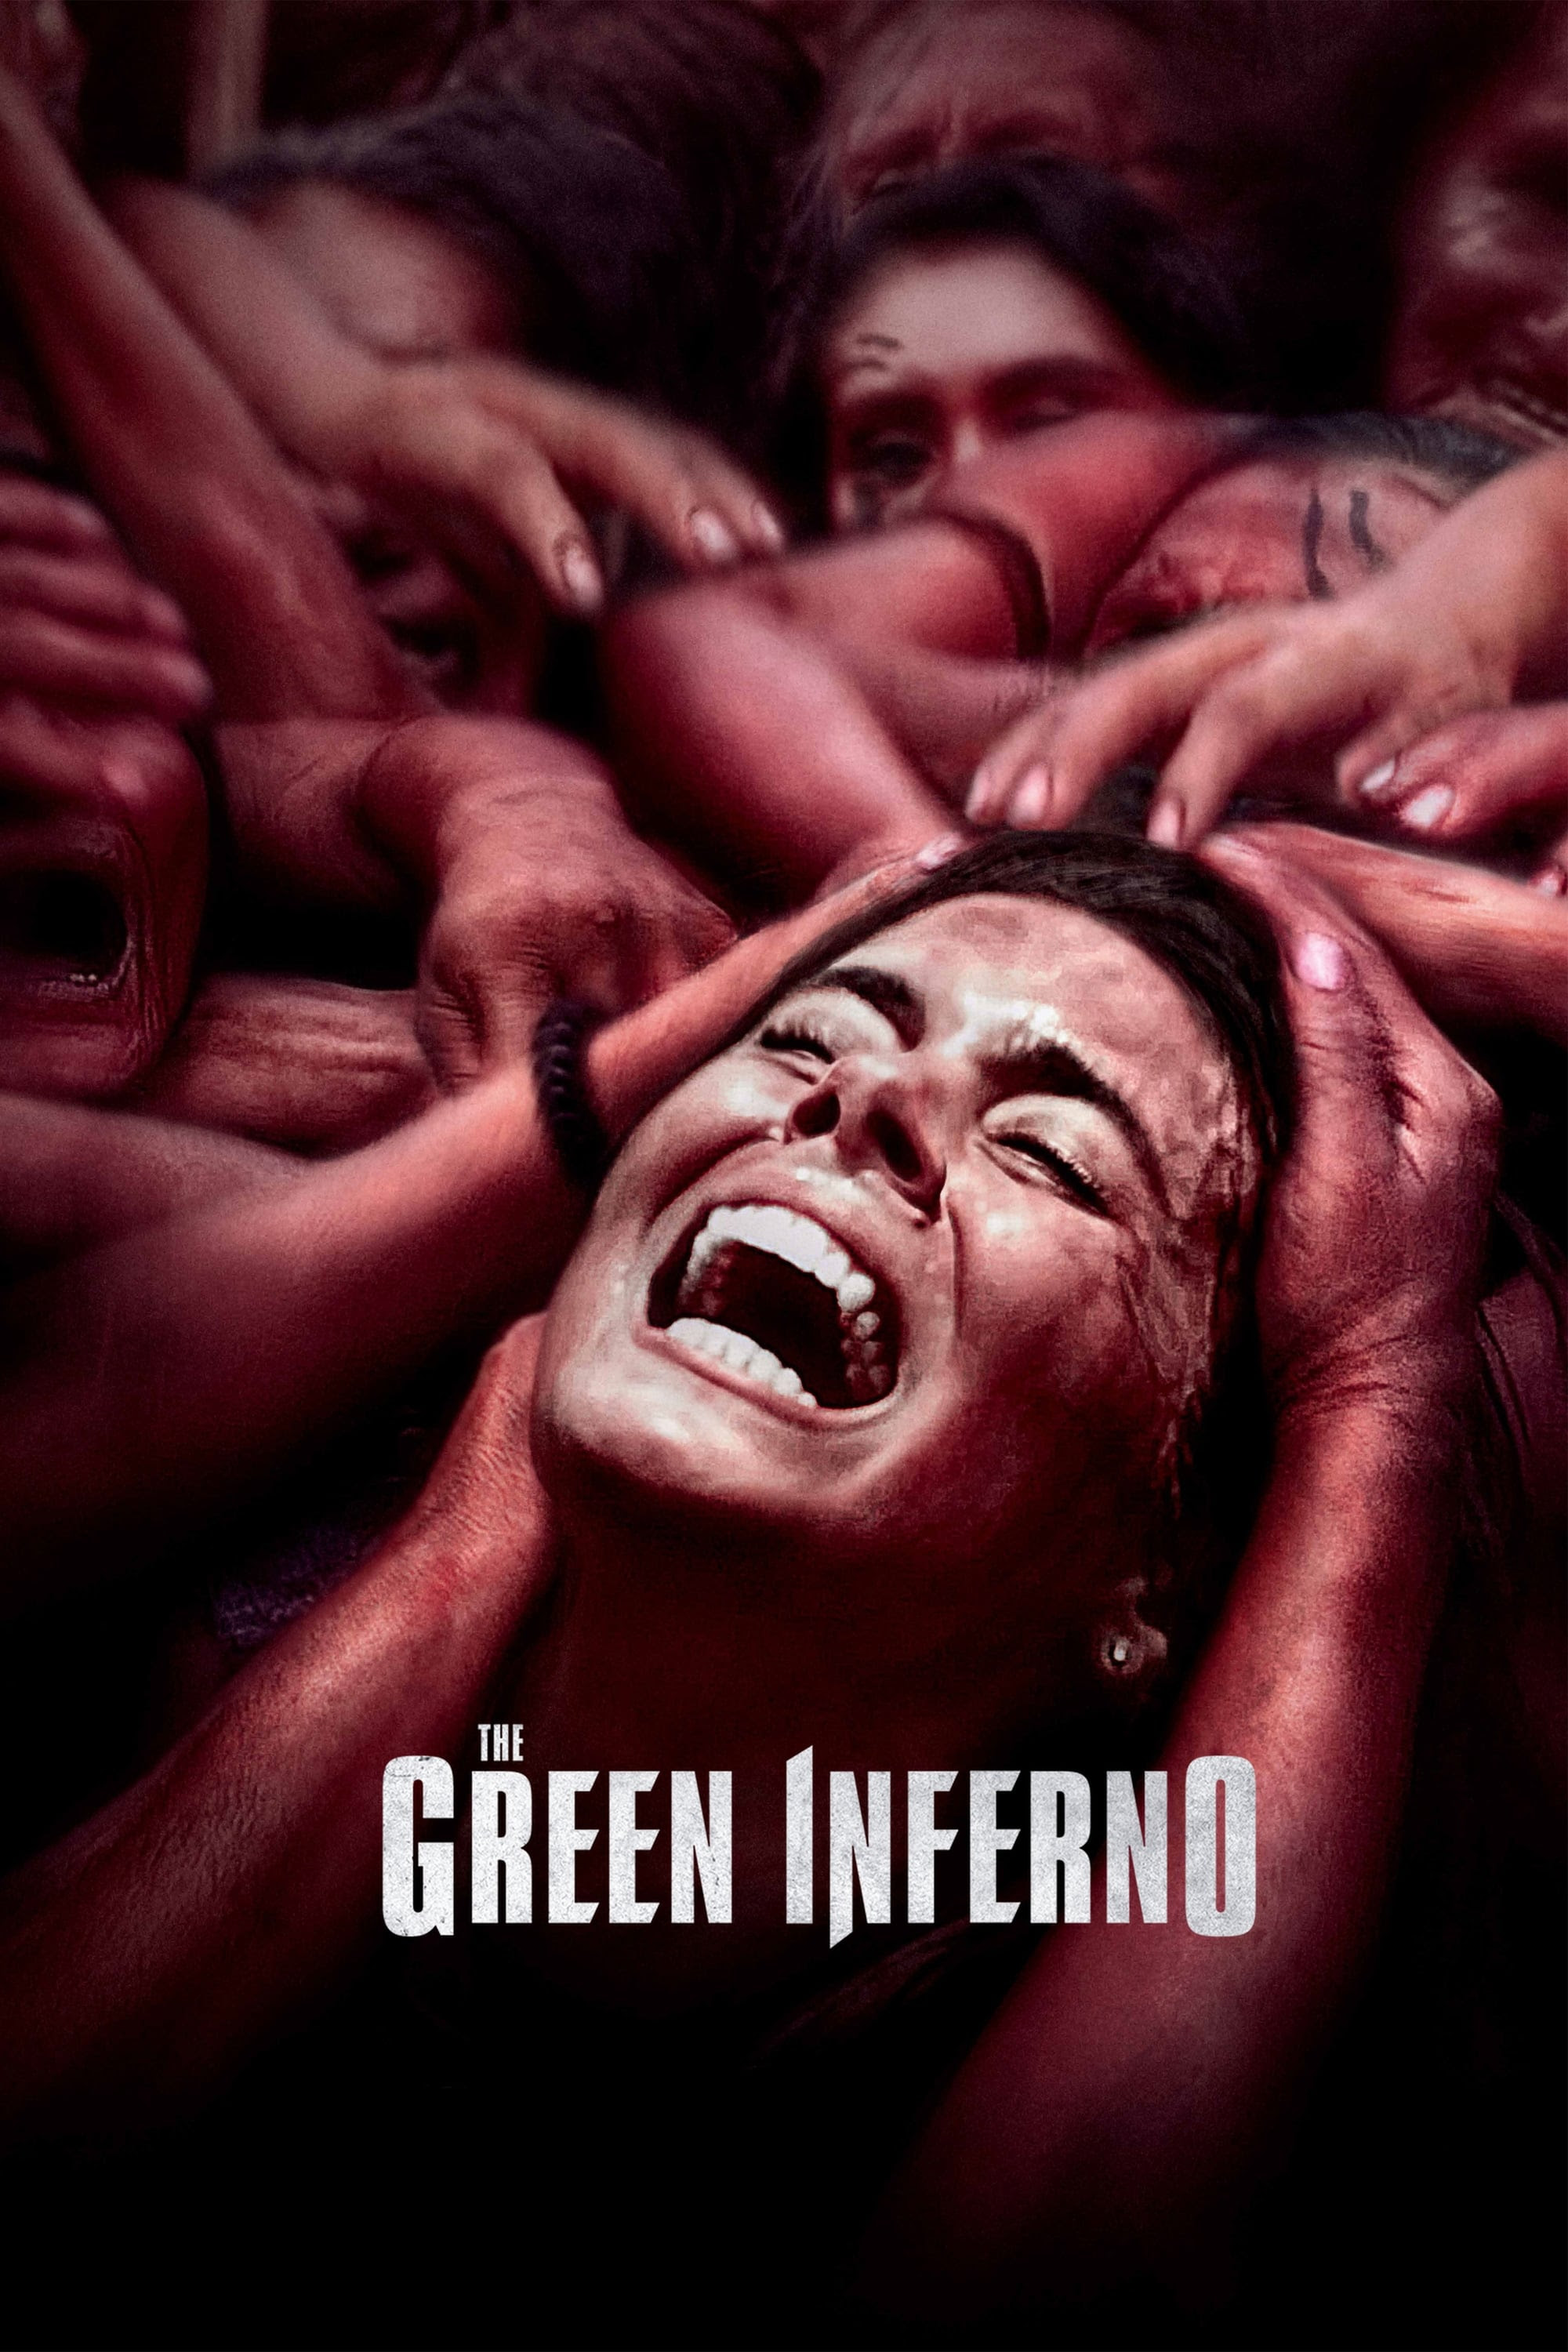 Free Download The Green Inferno For Free - moviefreedownload